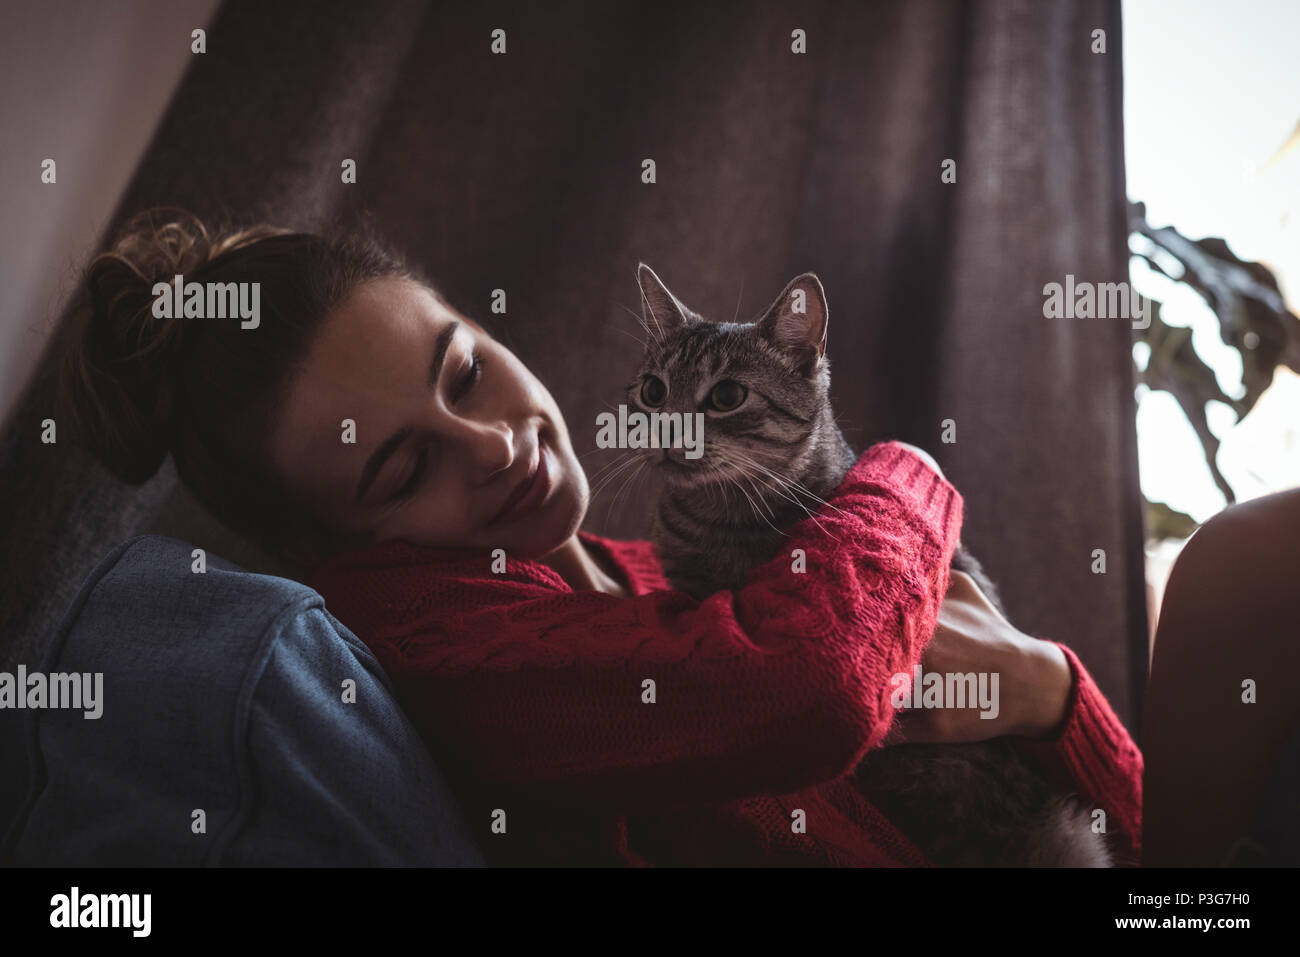 Smiling woman embracing her pet cat at home Stock Photo